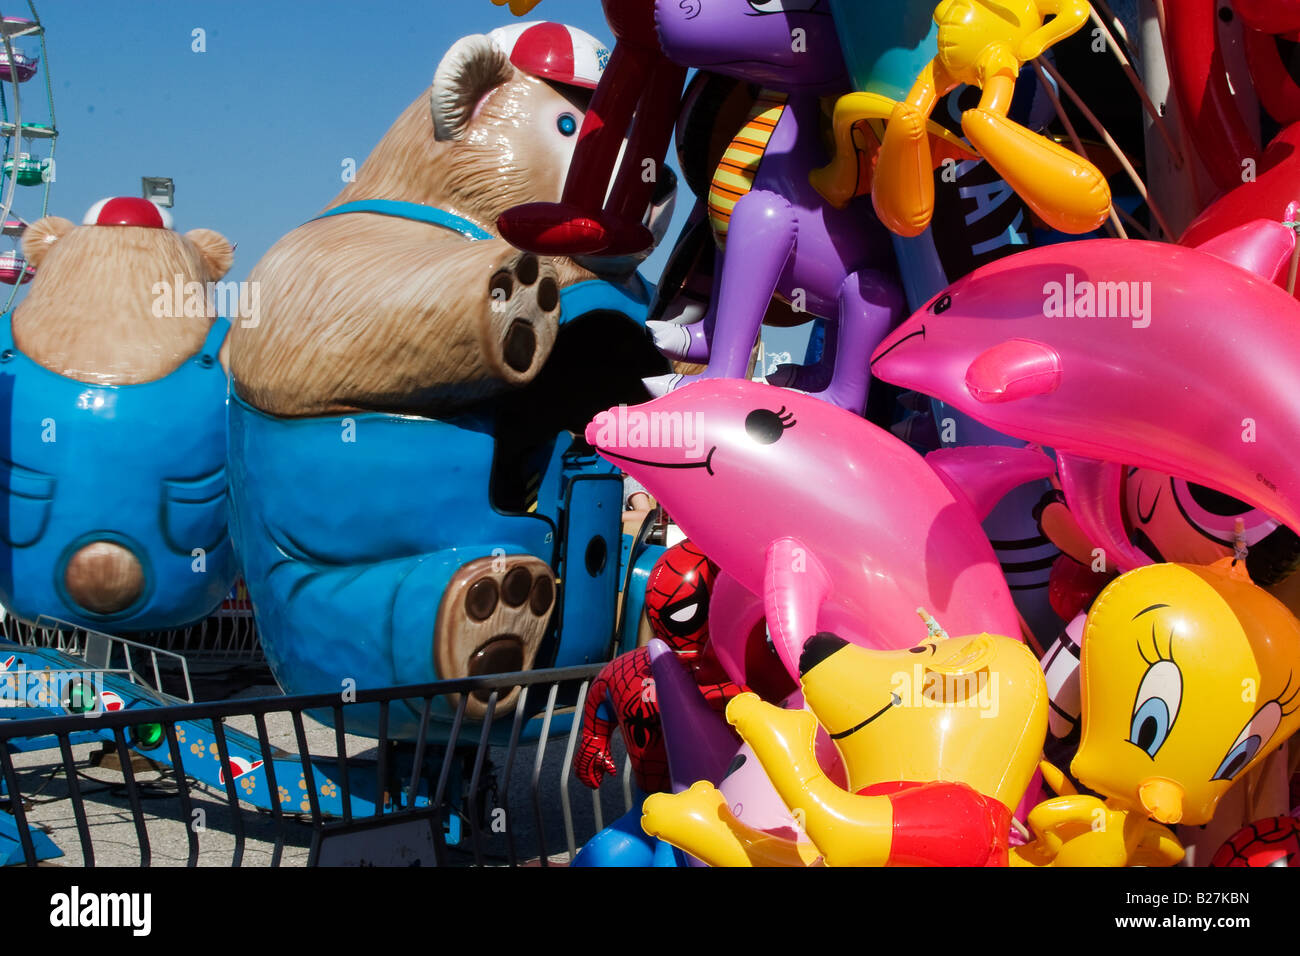 Toys are stacked up as prizes for the winners at a summer carnival in Newport Rhode Island Stock Photo